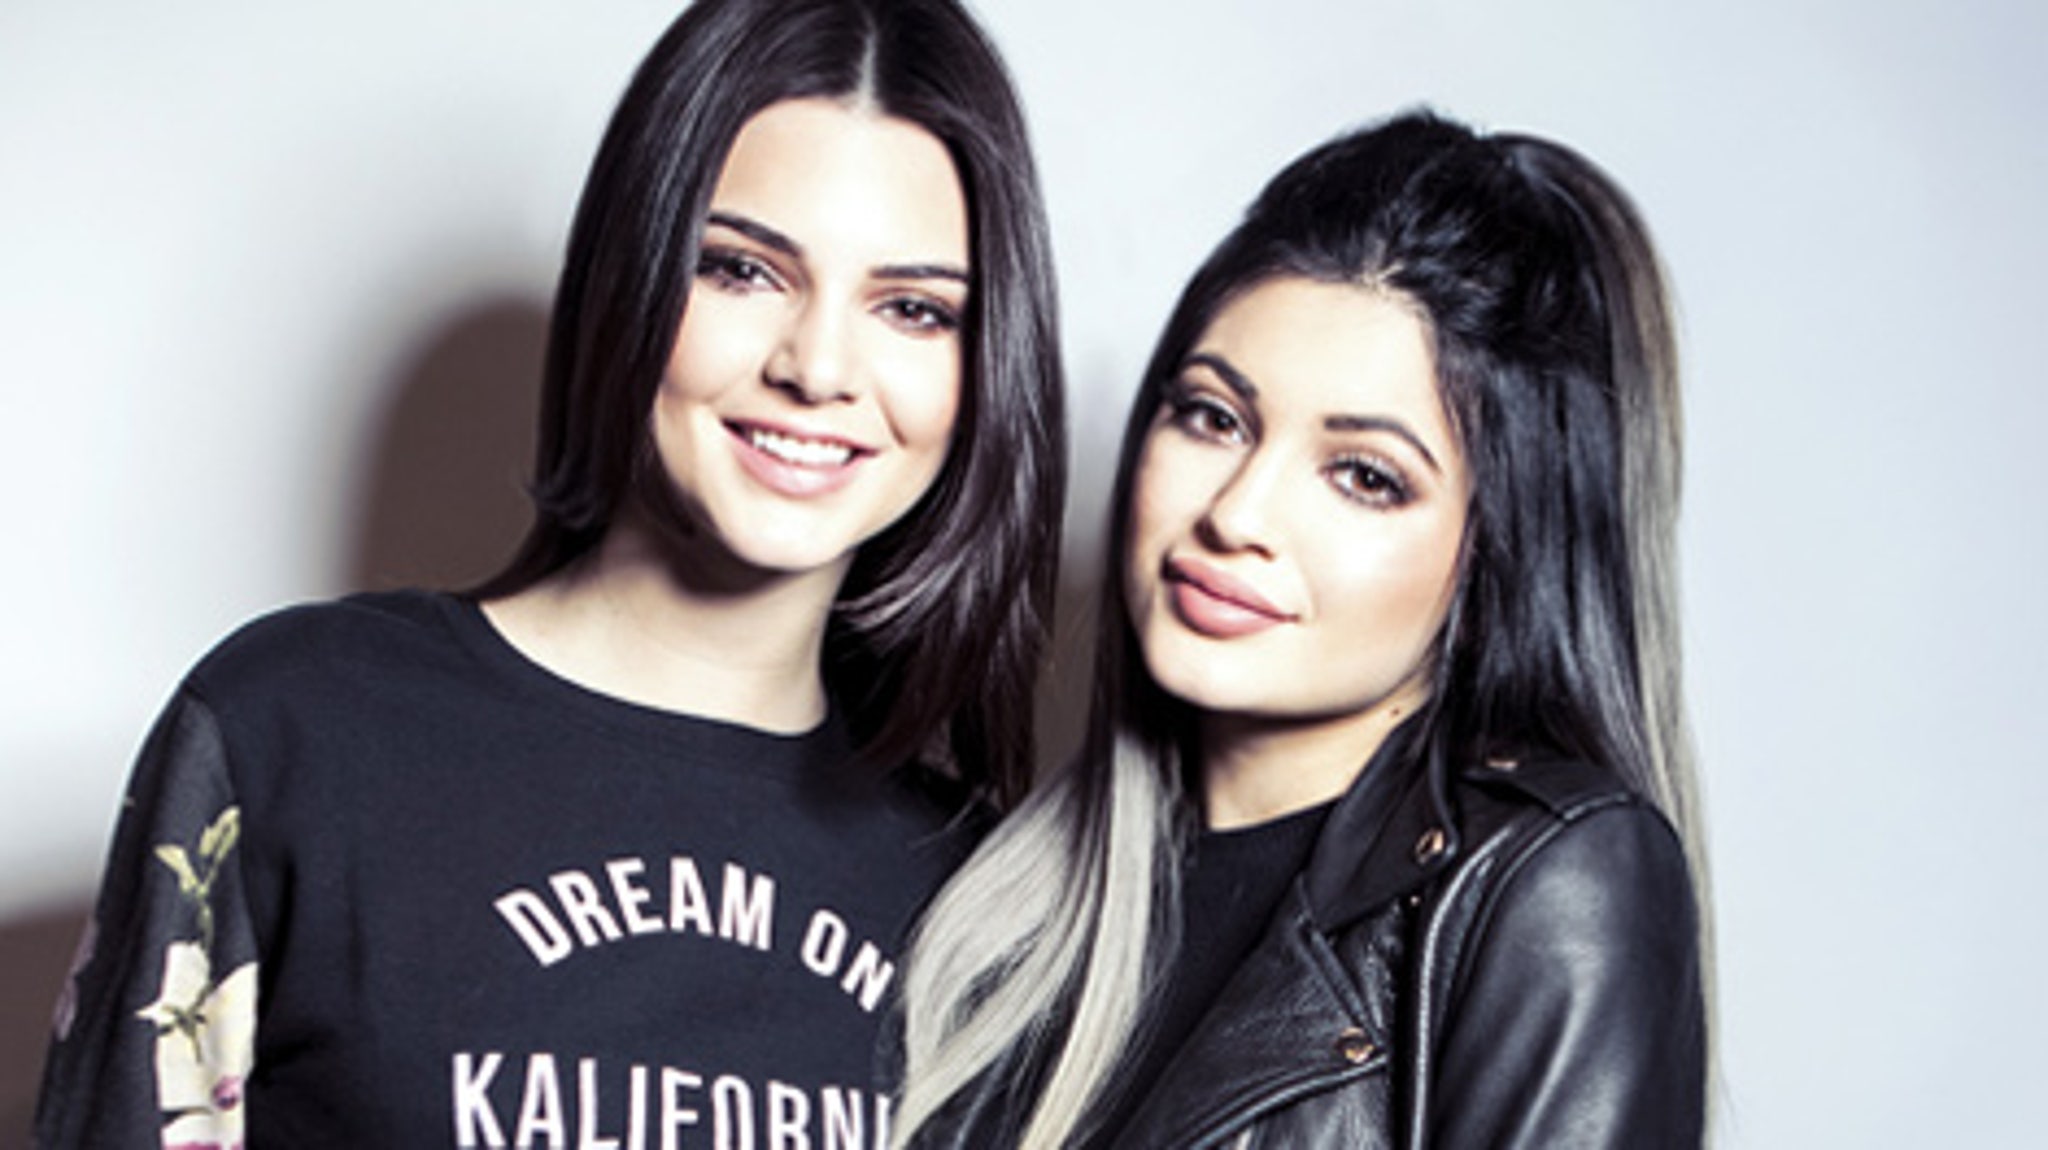 Kylie Jenner Looks Just Like Kim in New Photo Shoot With Kendall!